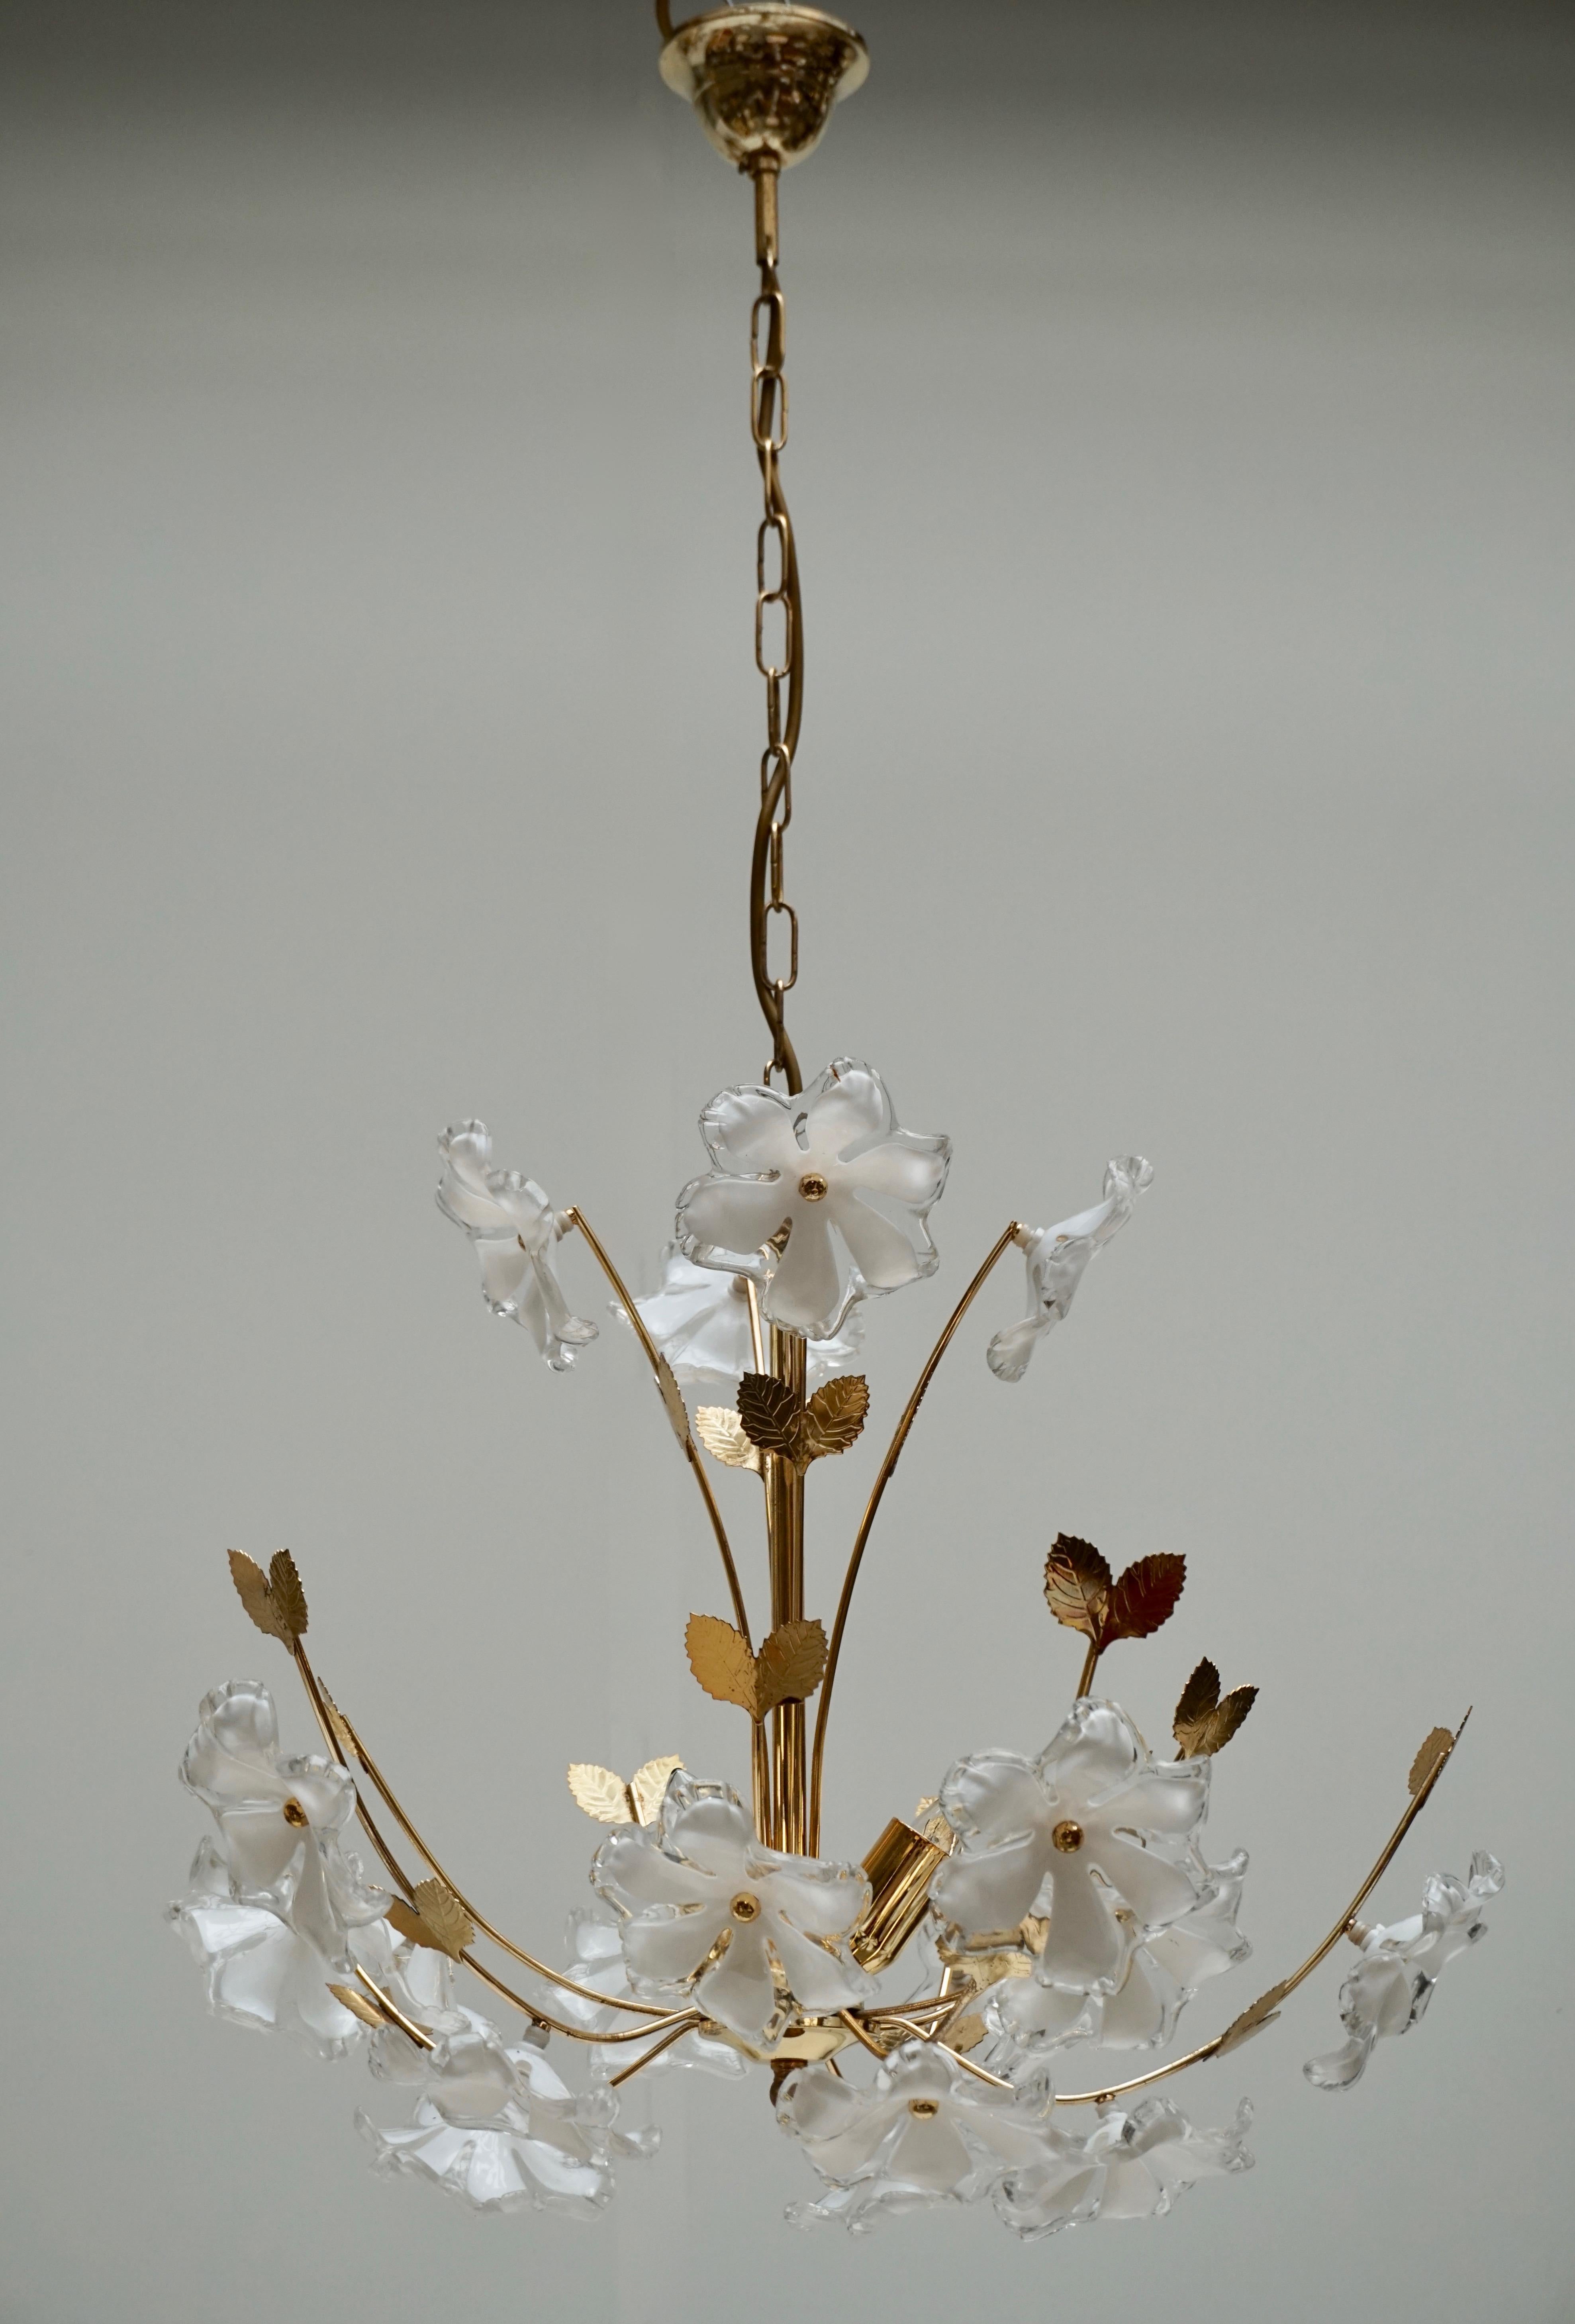 A beautiful brass and plastic flower chandelier made in Italy, 1960s. The chandelier requires three European E14 candelabra bulbs, each up to 40 watts. It is made of plastic flowers and a brass frame. 
Diameter 55 cm.
Height fixture 42 cm.
Total